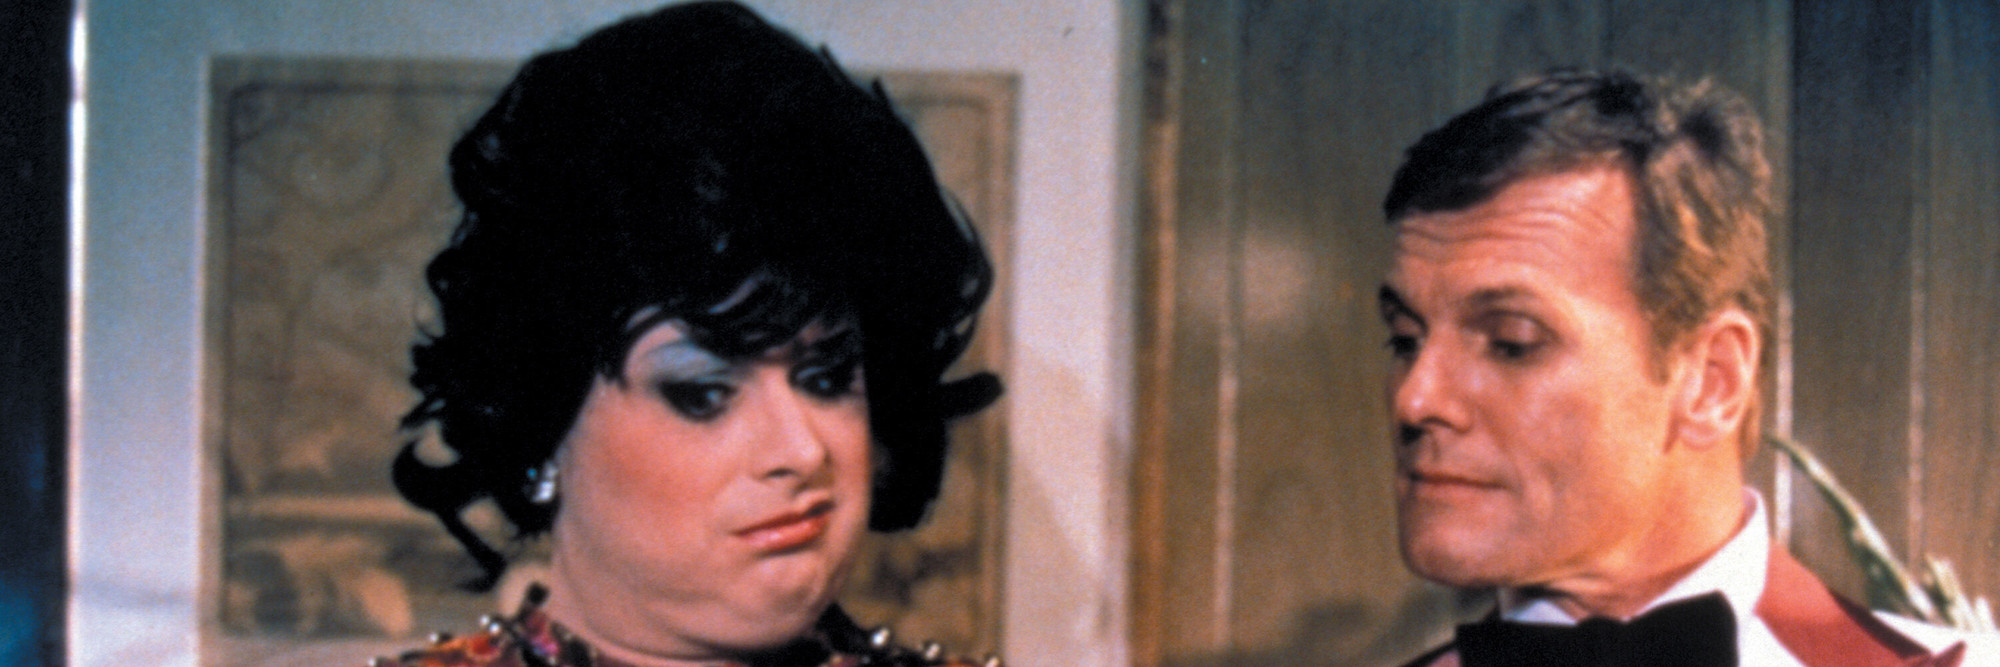 Polyester. 1981. USA. Directed by John Waters. Courtesy Photofest